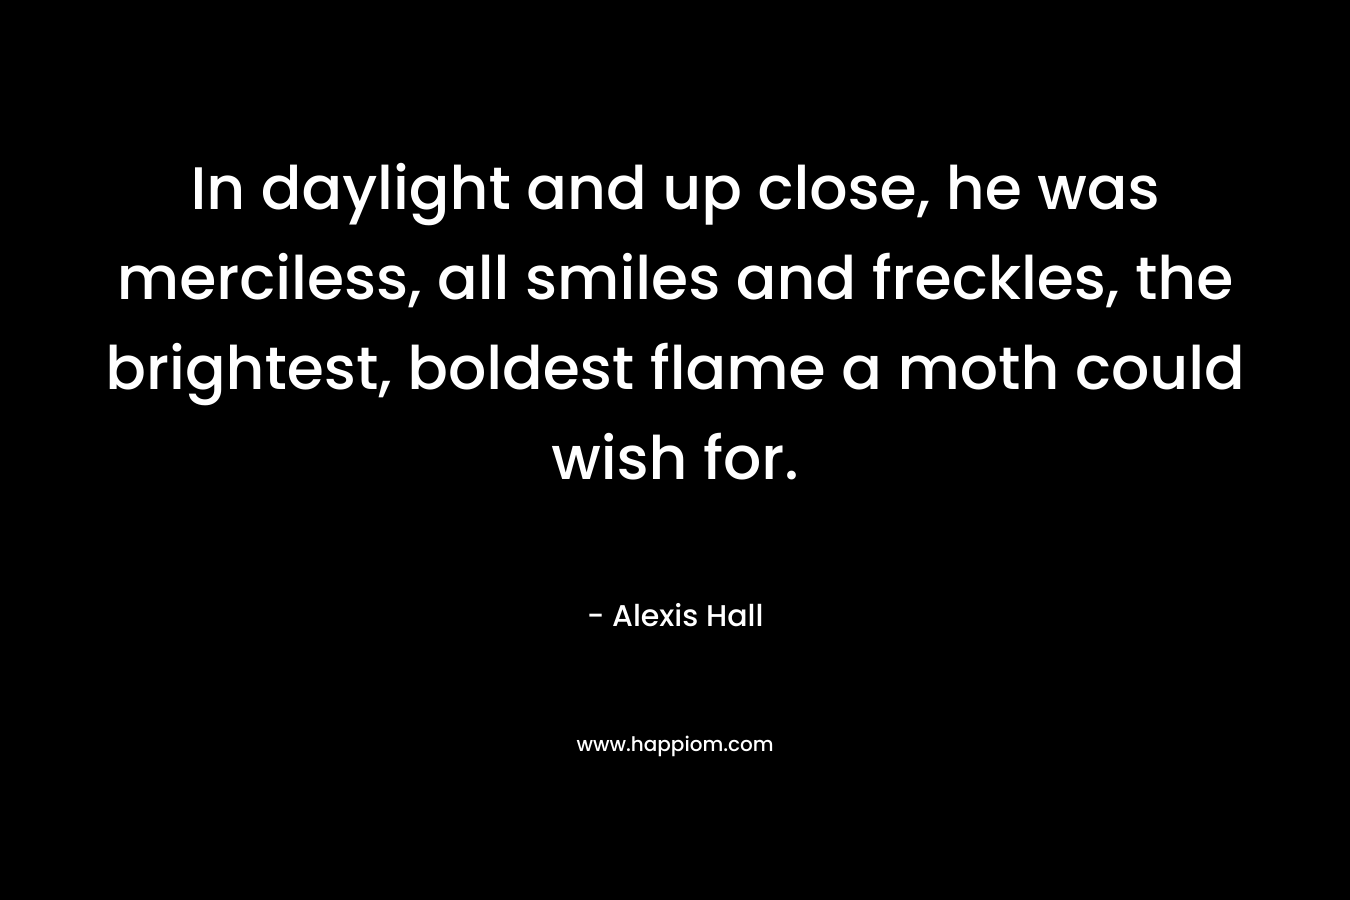 In daylight and up close, he was merciless, all smiles and freckles, the brightest, boldest flame a moth could wish for. – Alexis  Hall